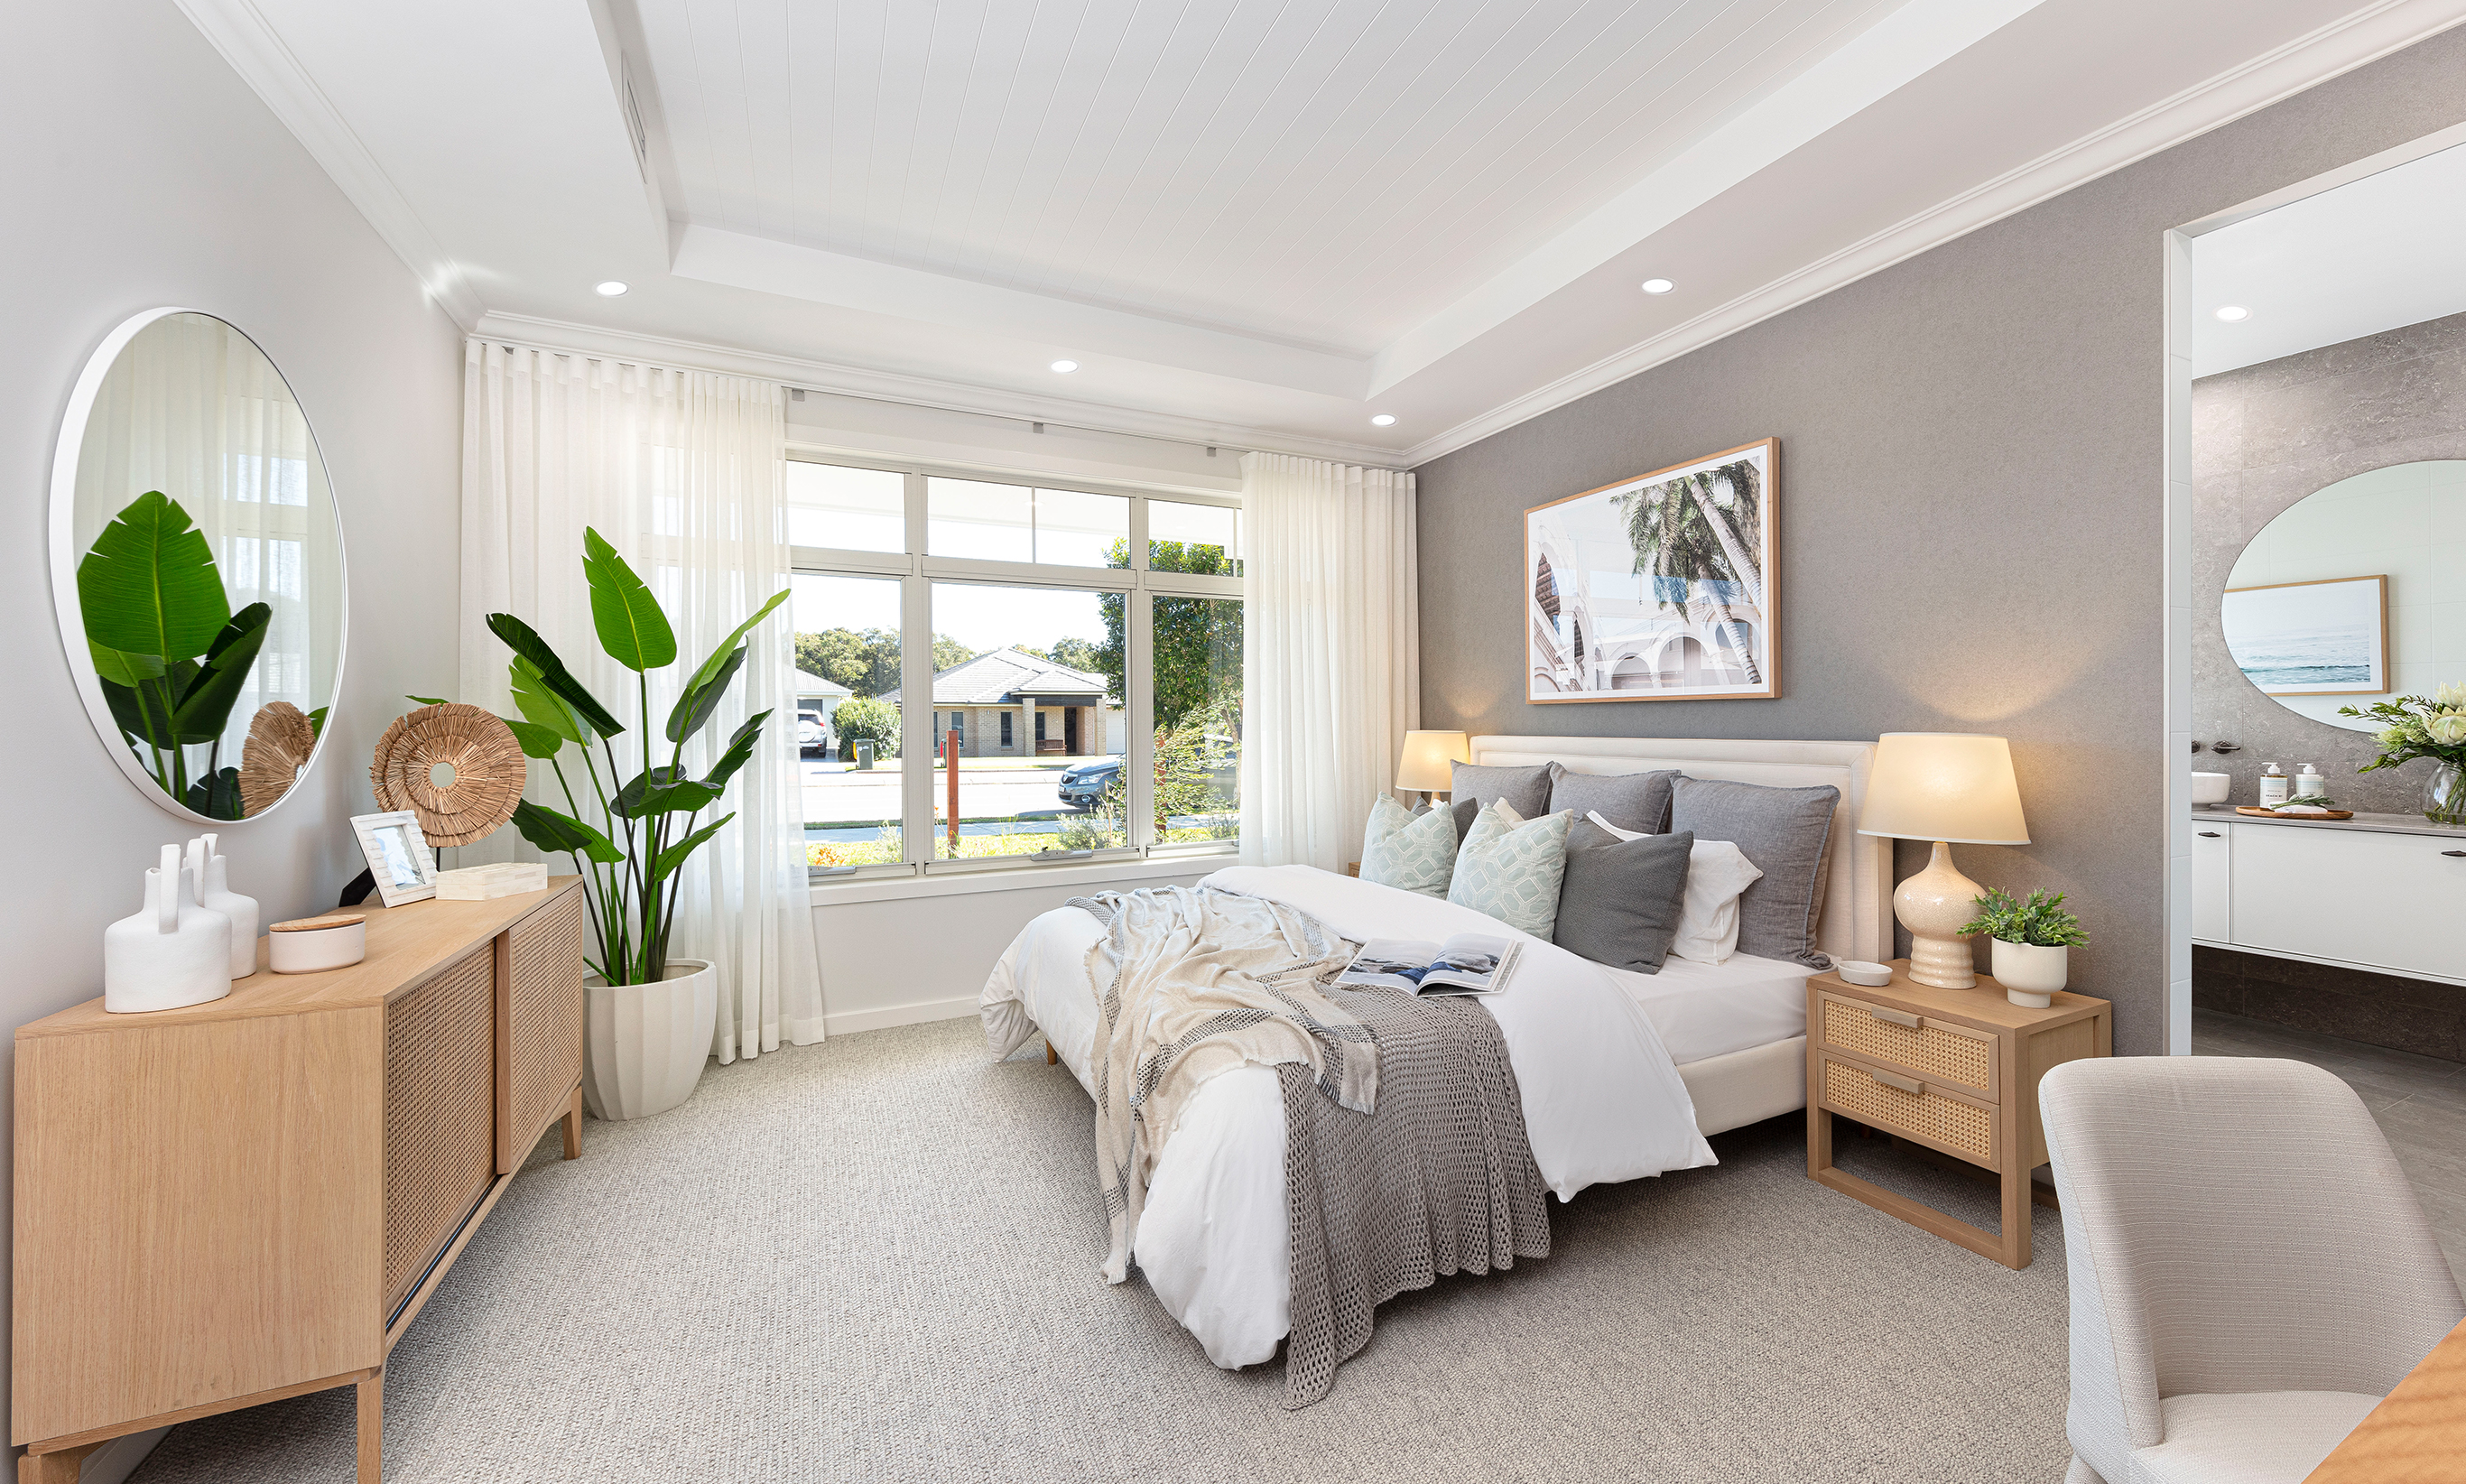 Coastal styled Master Suite Bedroom with tranquil stone colours and natural linens and cottons to compliment the coastal styling throughout the Retreat at Waterford Living, by McDonald Jones